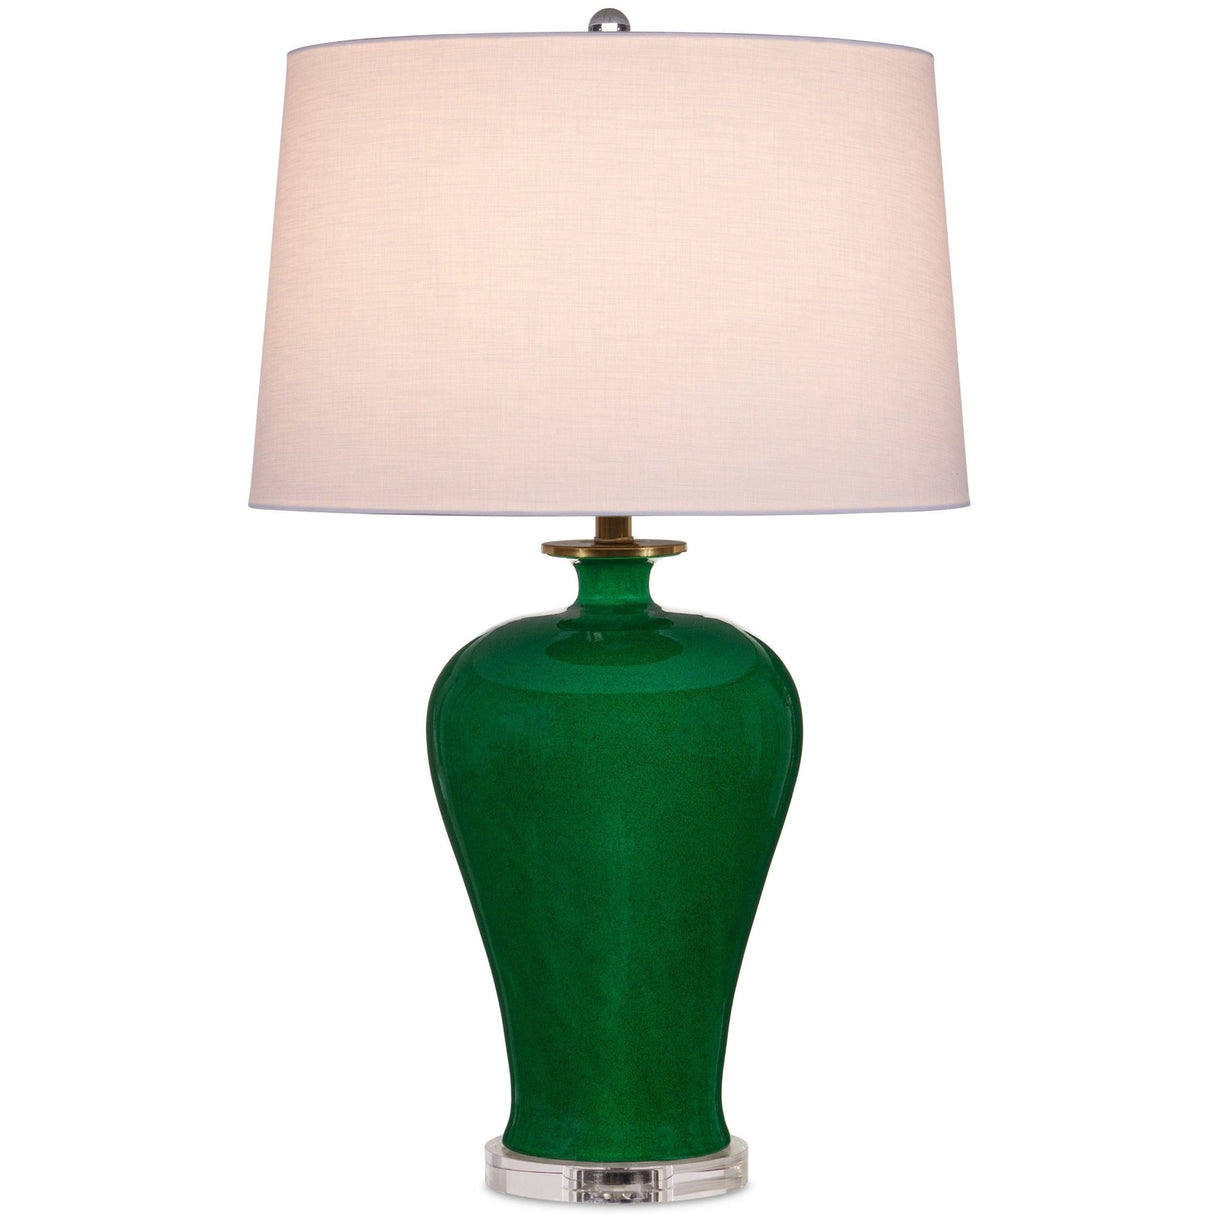 Currey & Company Imperial Green Table Lamp Lamps currey-co-6000-0907 633306055131